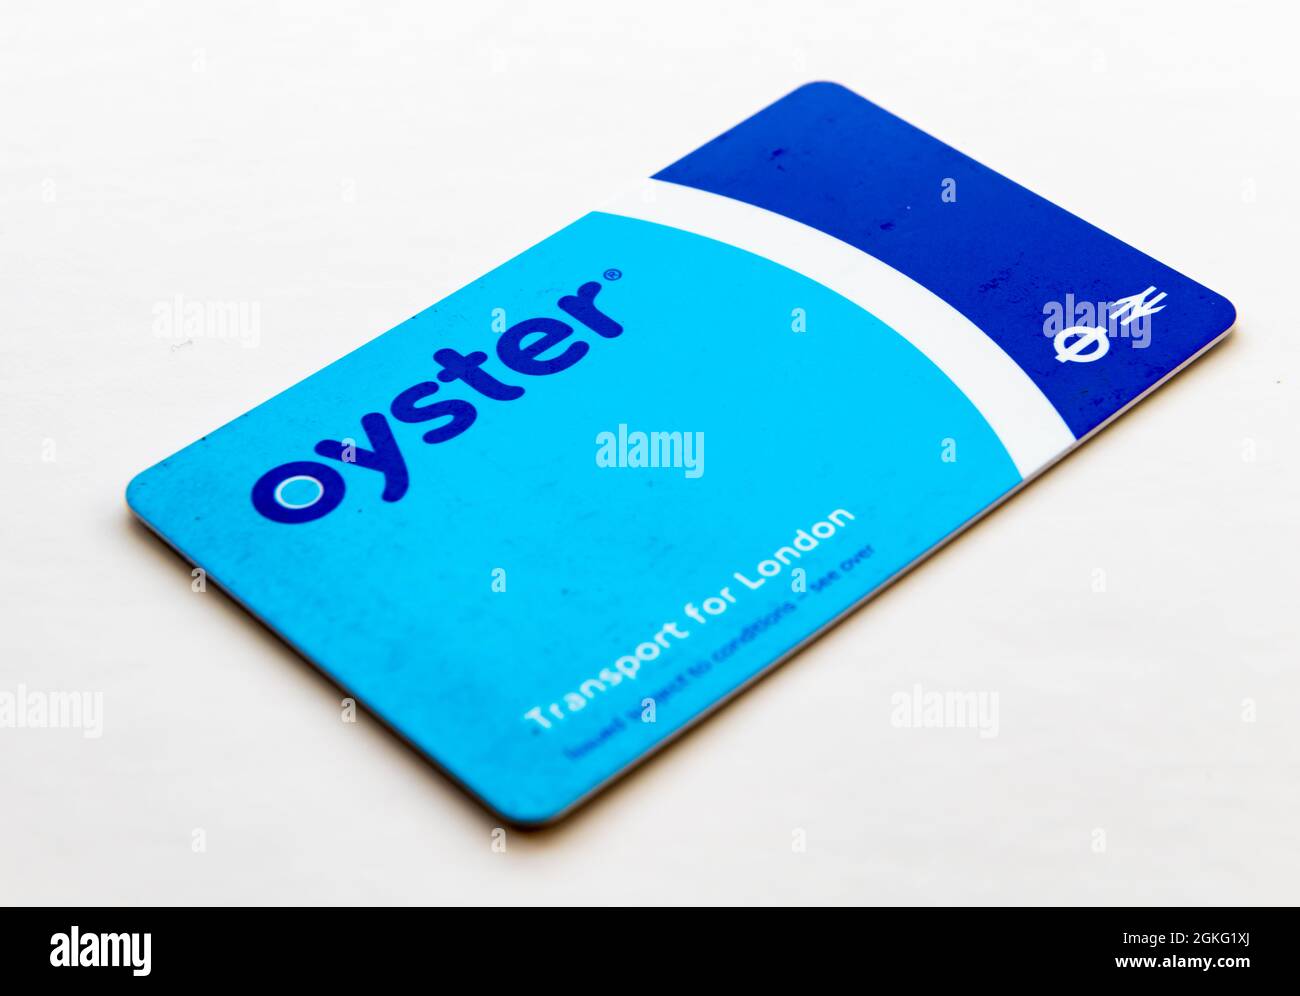 London. UK- 09.12.2021: a Transport for London Oyster Card for travelling on public transport in and around the capital. Stock Photo